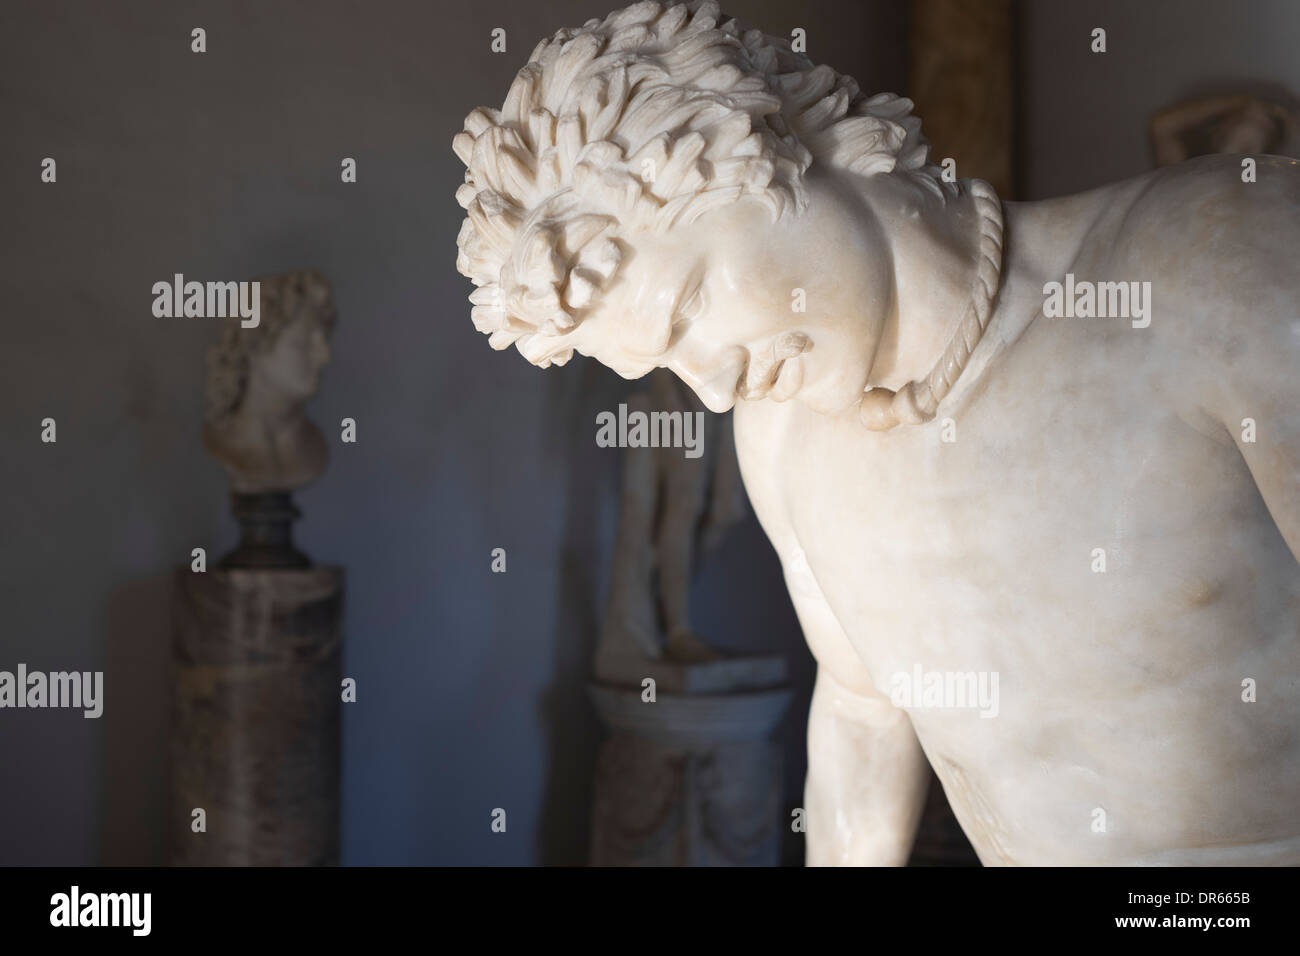 Dying Gaul, sterben Gladiator, sterbende Galater Satue. Stockfoto